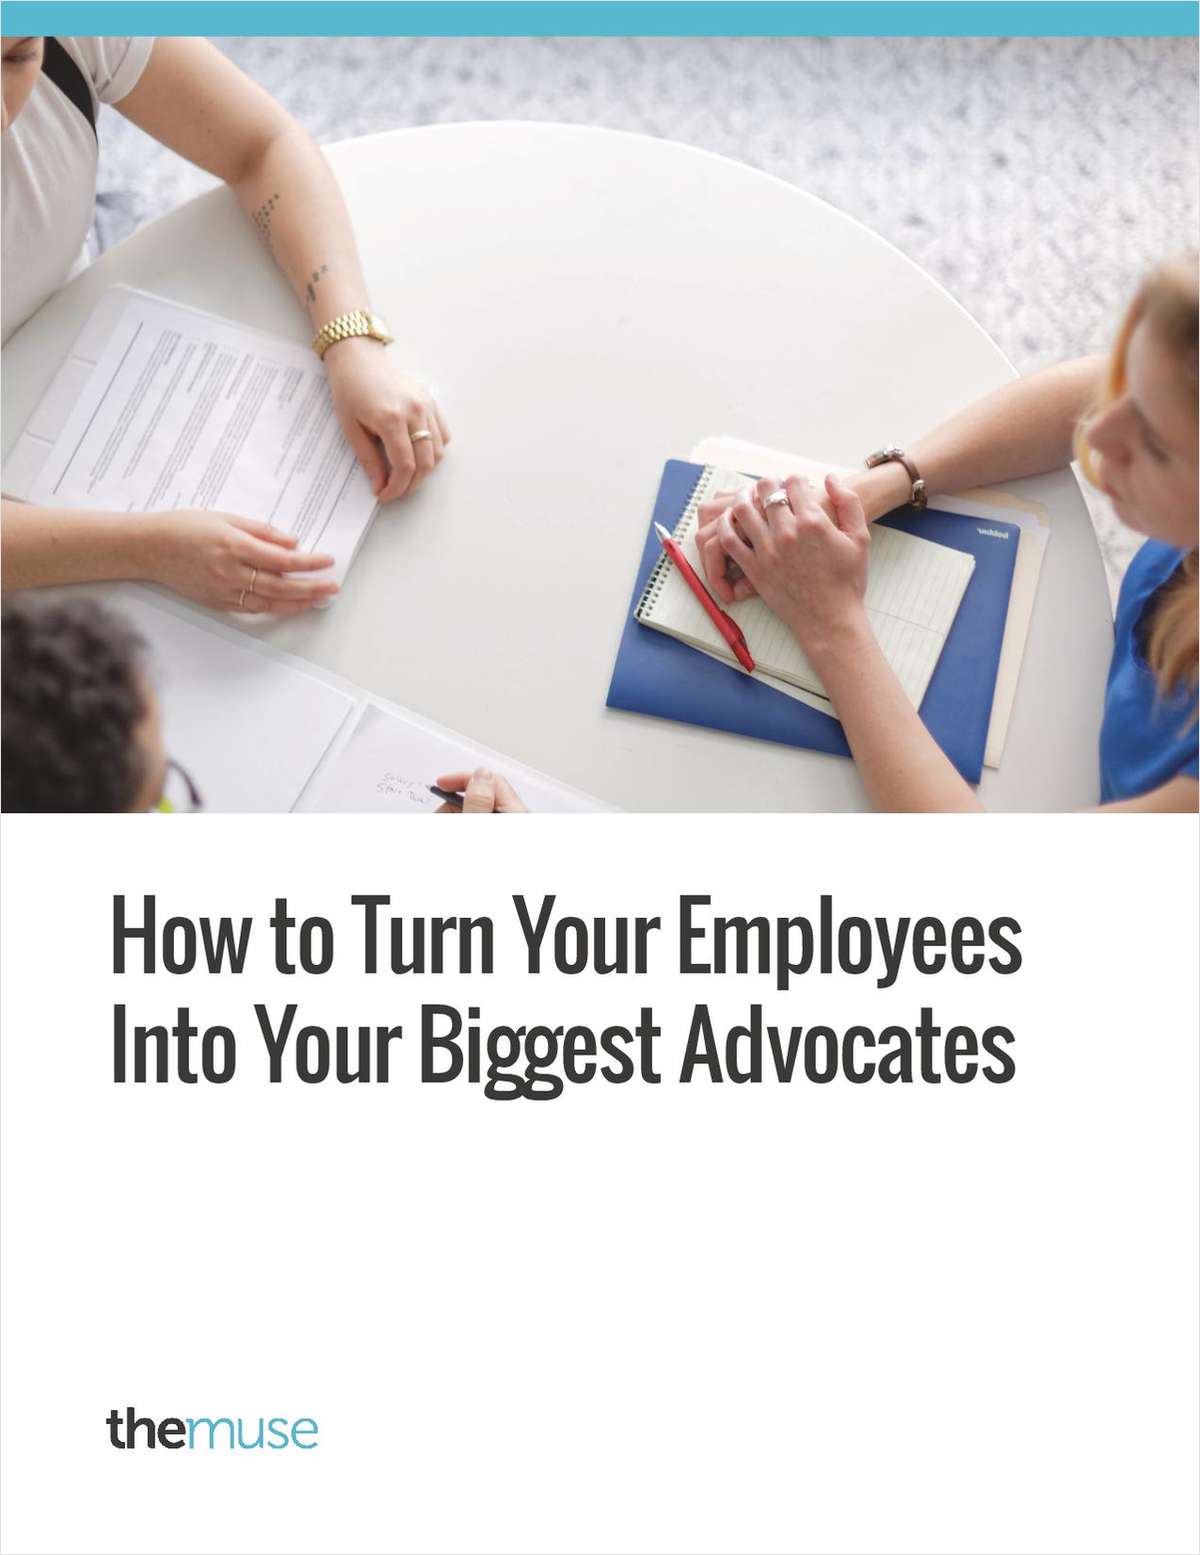 How to Turn Your Employees Into Your Biggest Advocates